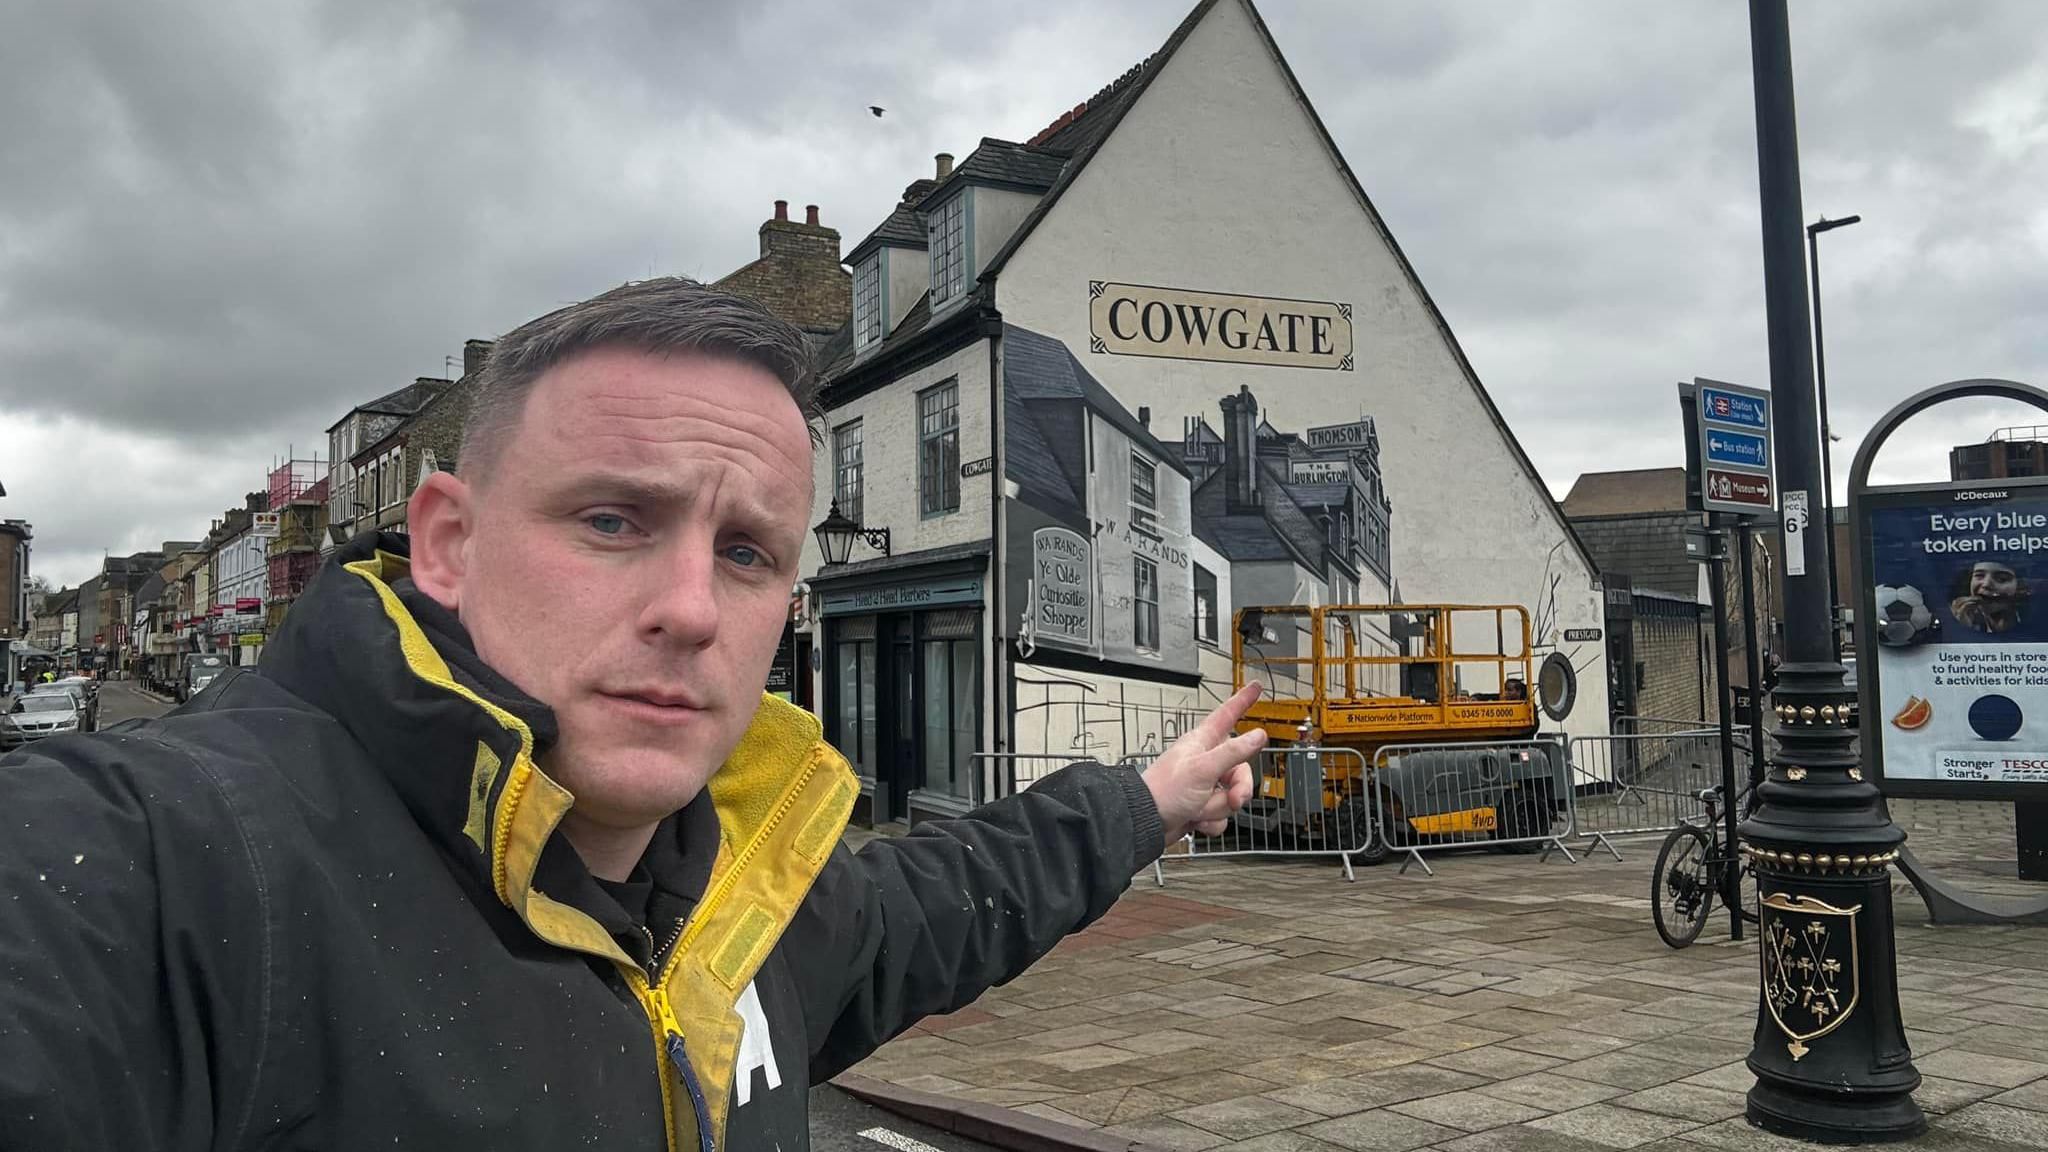 Nathan selfie in front of the Cowgate Mural